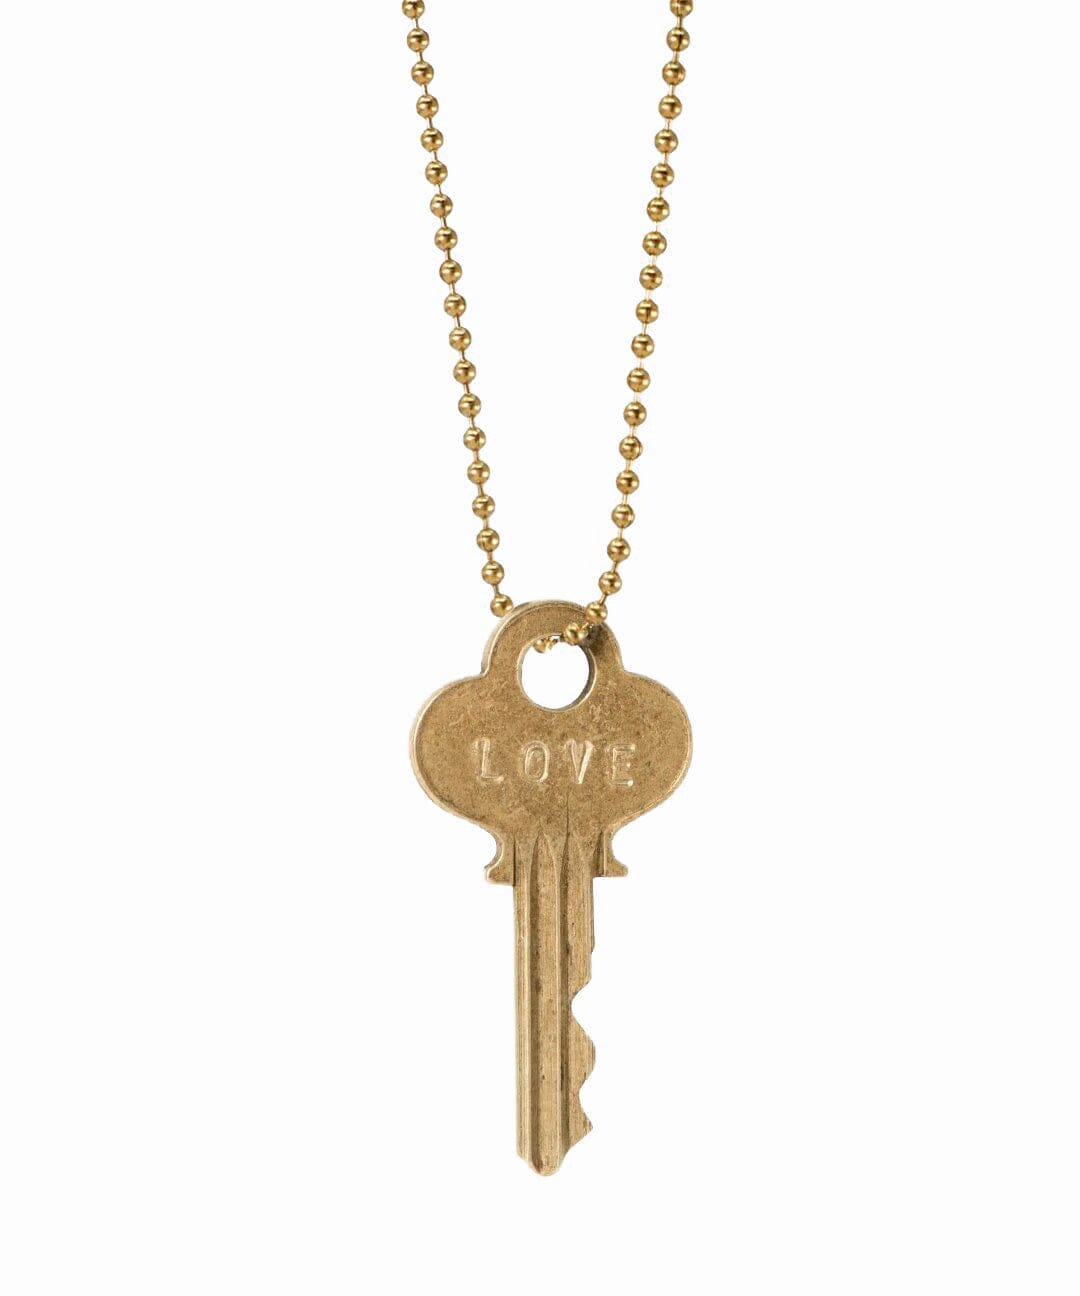 N - Vintage Classic Ball Chain Key Necklace Necklaces The Giving Keys 